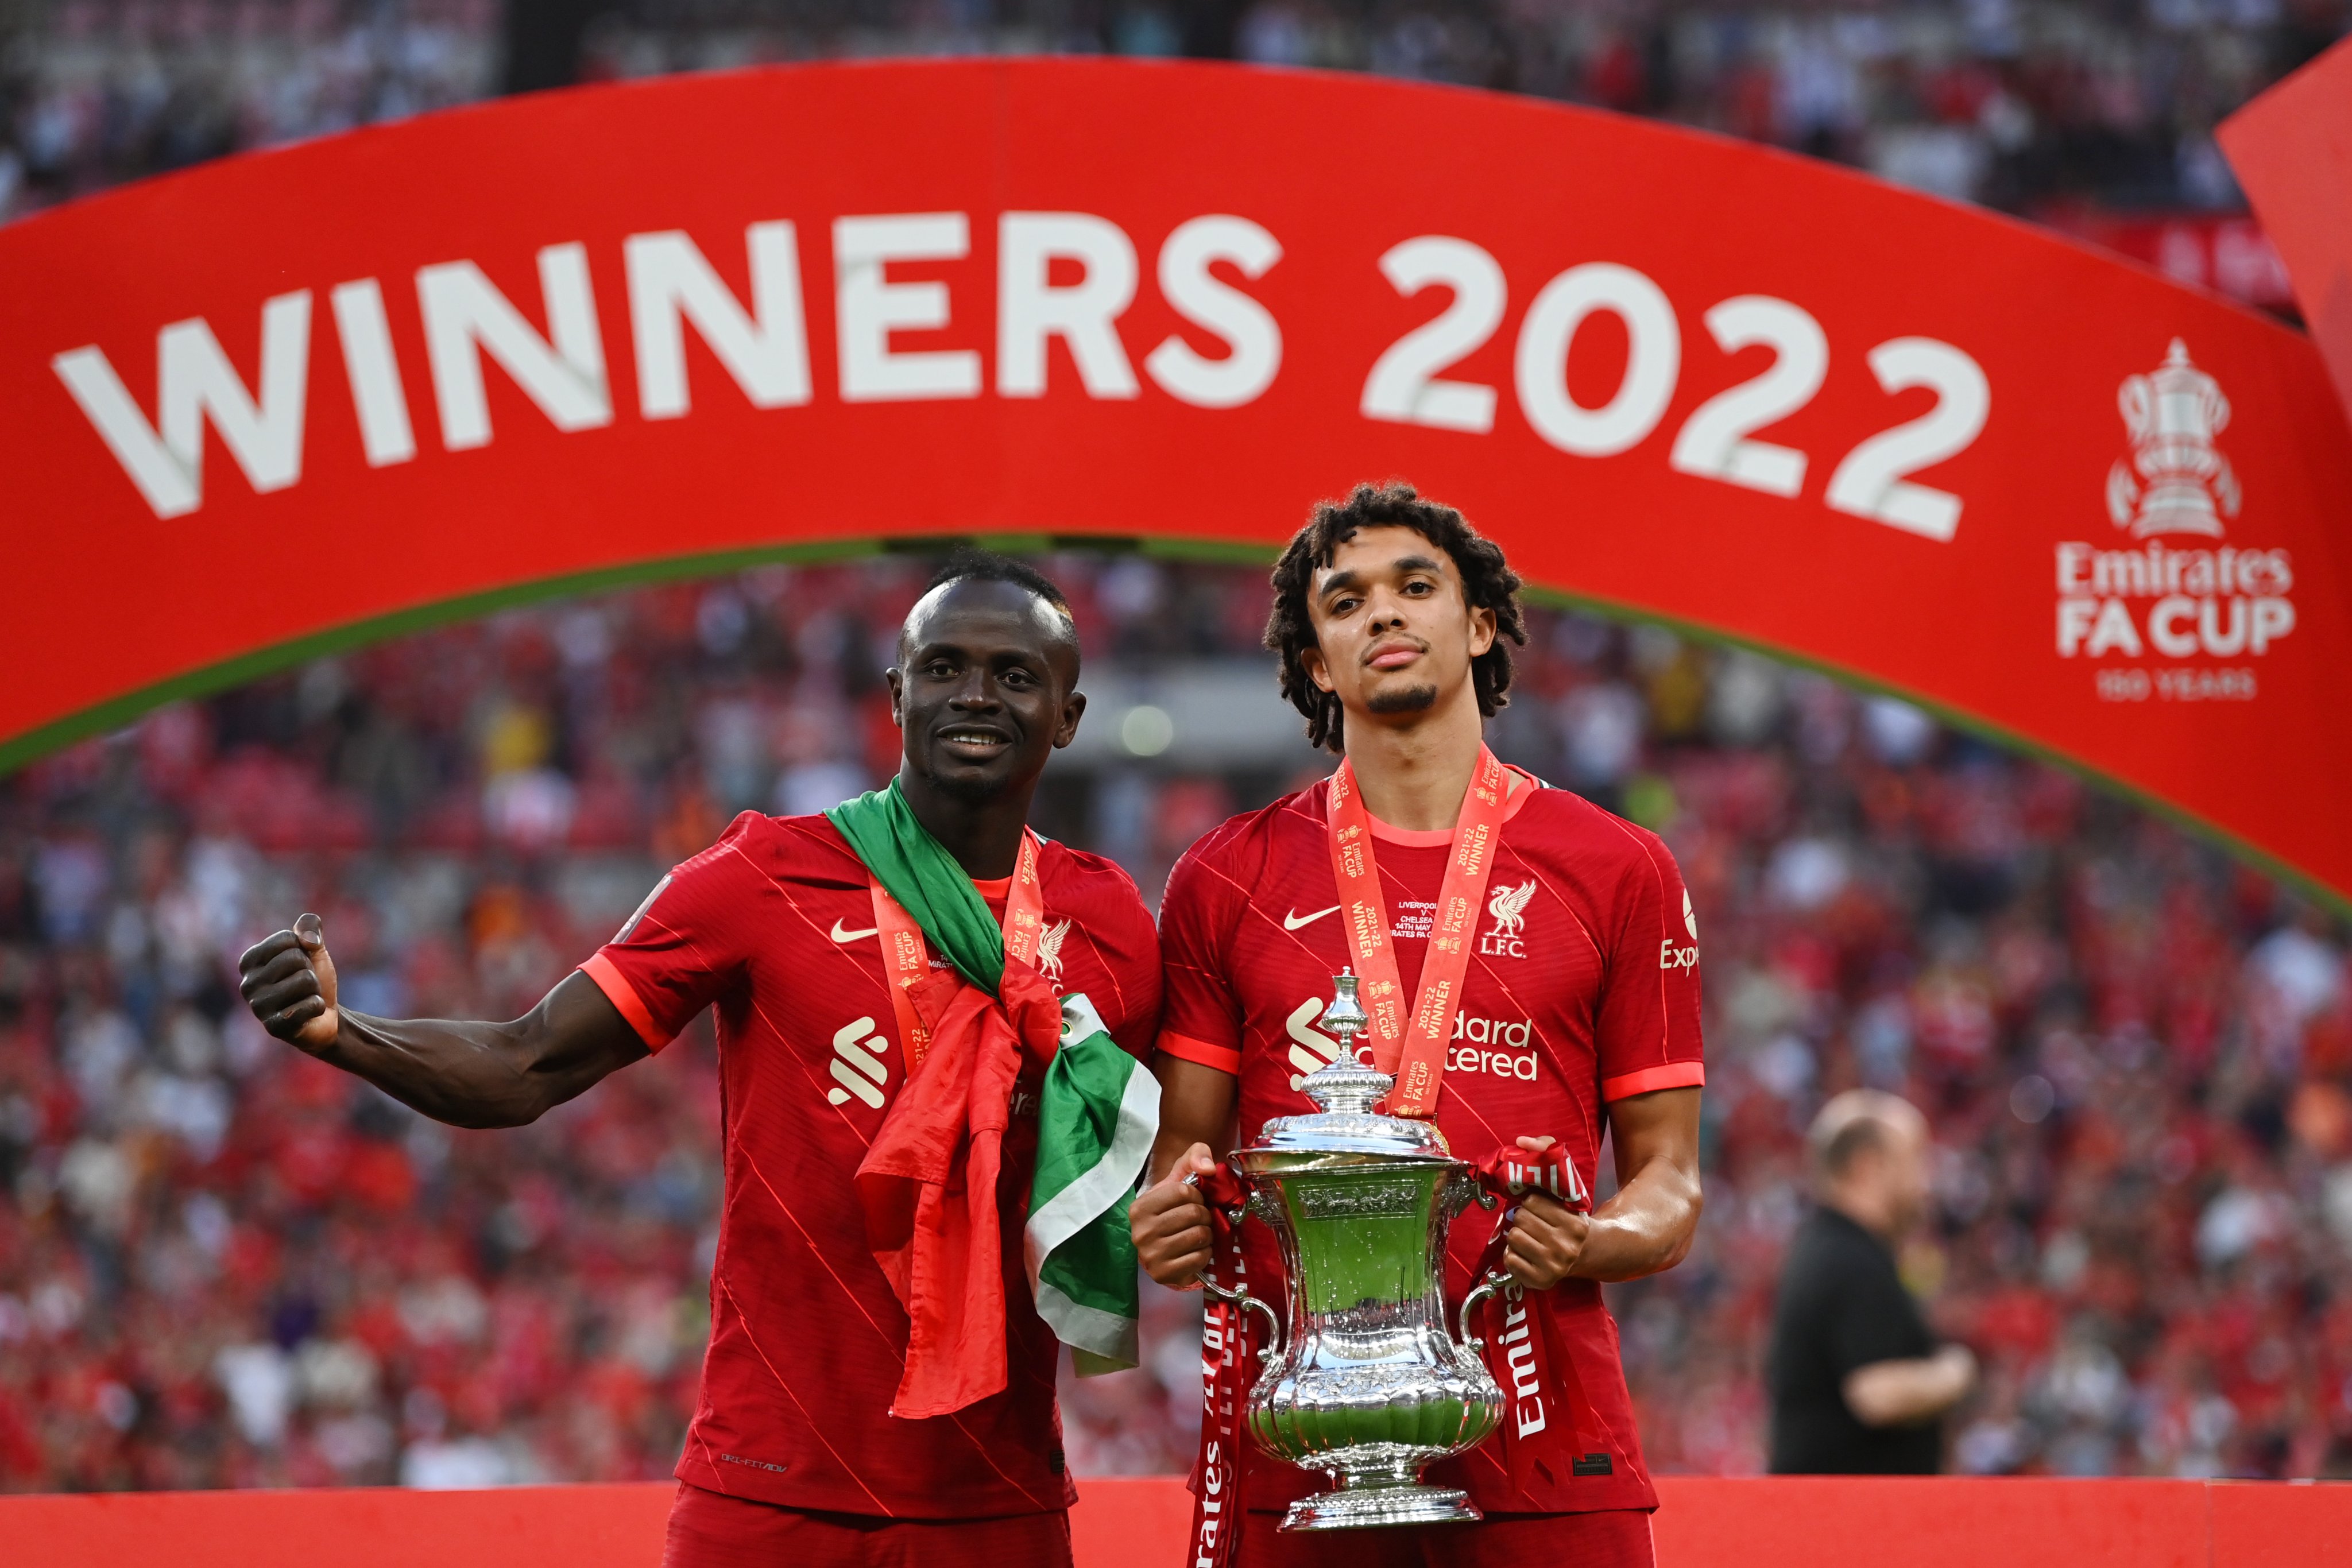 FA Cup Final 2022: LIVERPOOL win the FA Cup to keep QUADRUPLE dream alive, Alisson and Tsimikas star as Liverpool beat Chelsea 6-5 on penalties, Watch HIGHLIGHTS